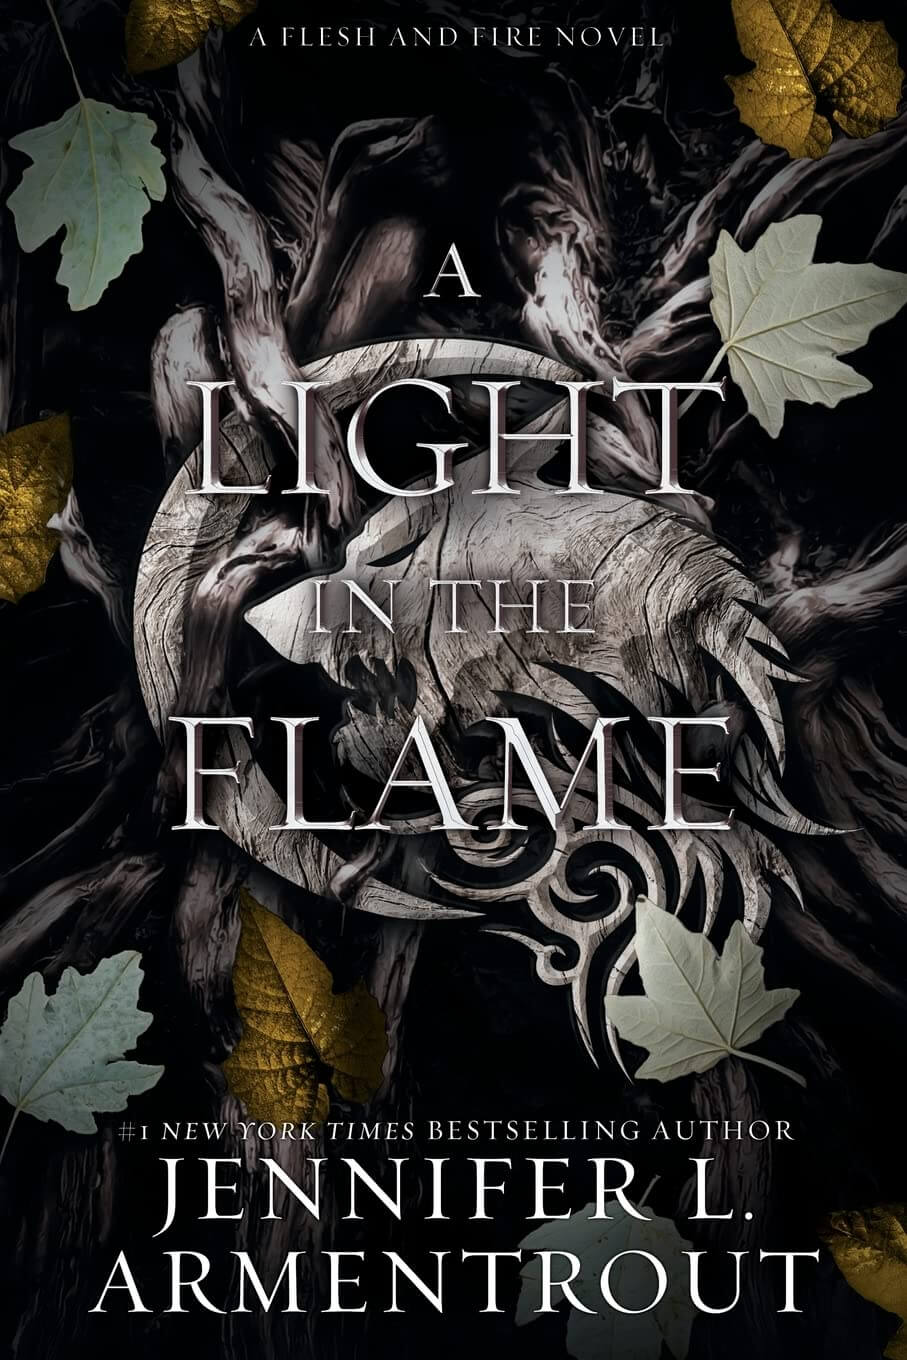 Flame　L.　Armentrout　in　(Flesh　A　(Paperback)　and　Series,　2)　Fire　Light　Jennifer　the　Book　Jarrolds,　Norwich